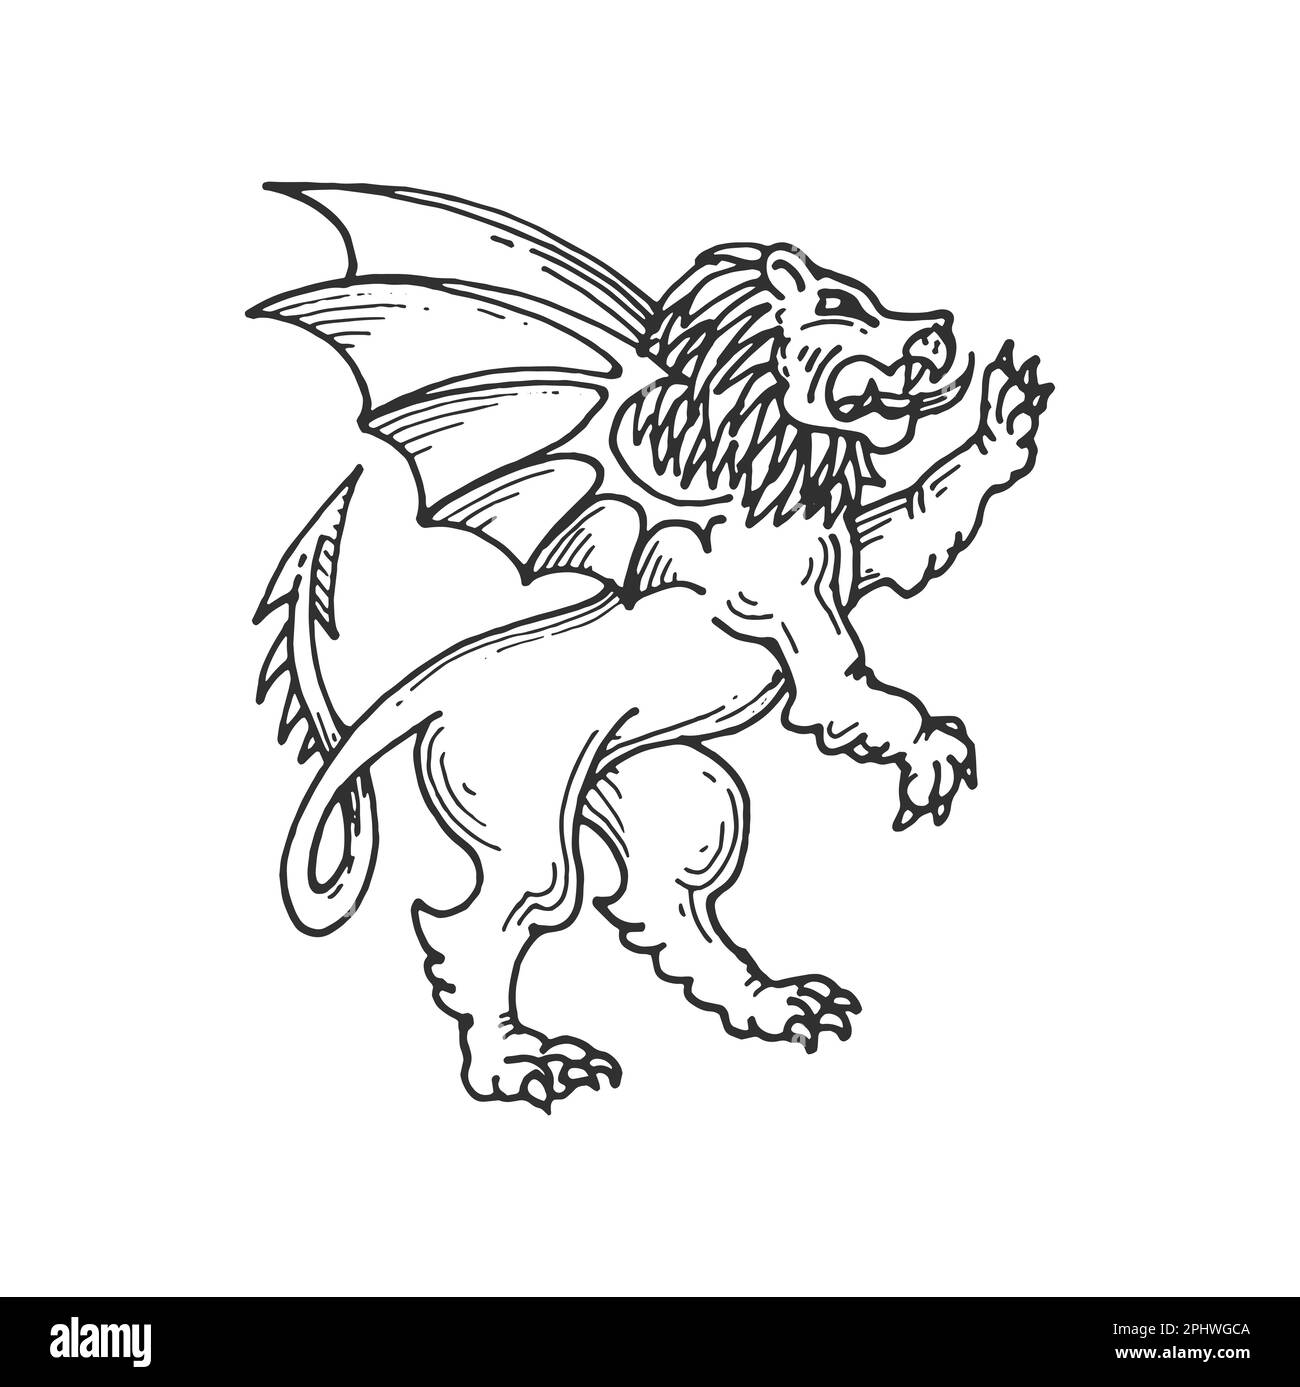 Winged lion medieval heraldic animal sketch. Vector royal heraldry coat of arms, insignia or crest with hand drawn king of beast. Isolated lion with d Stock Vector